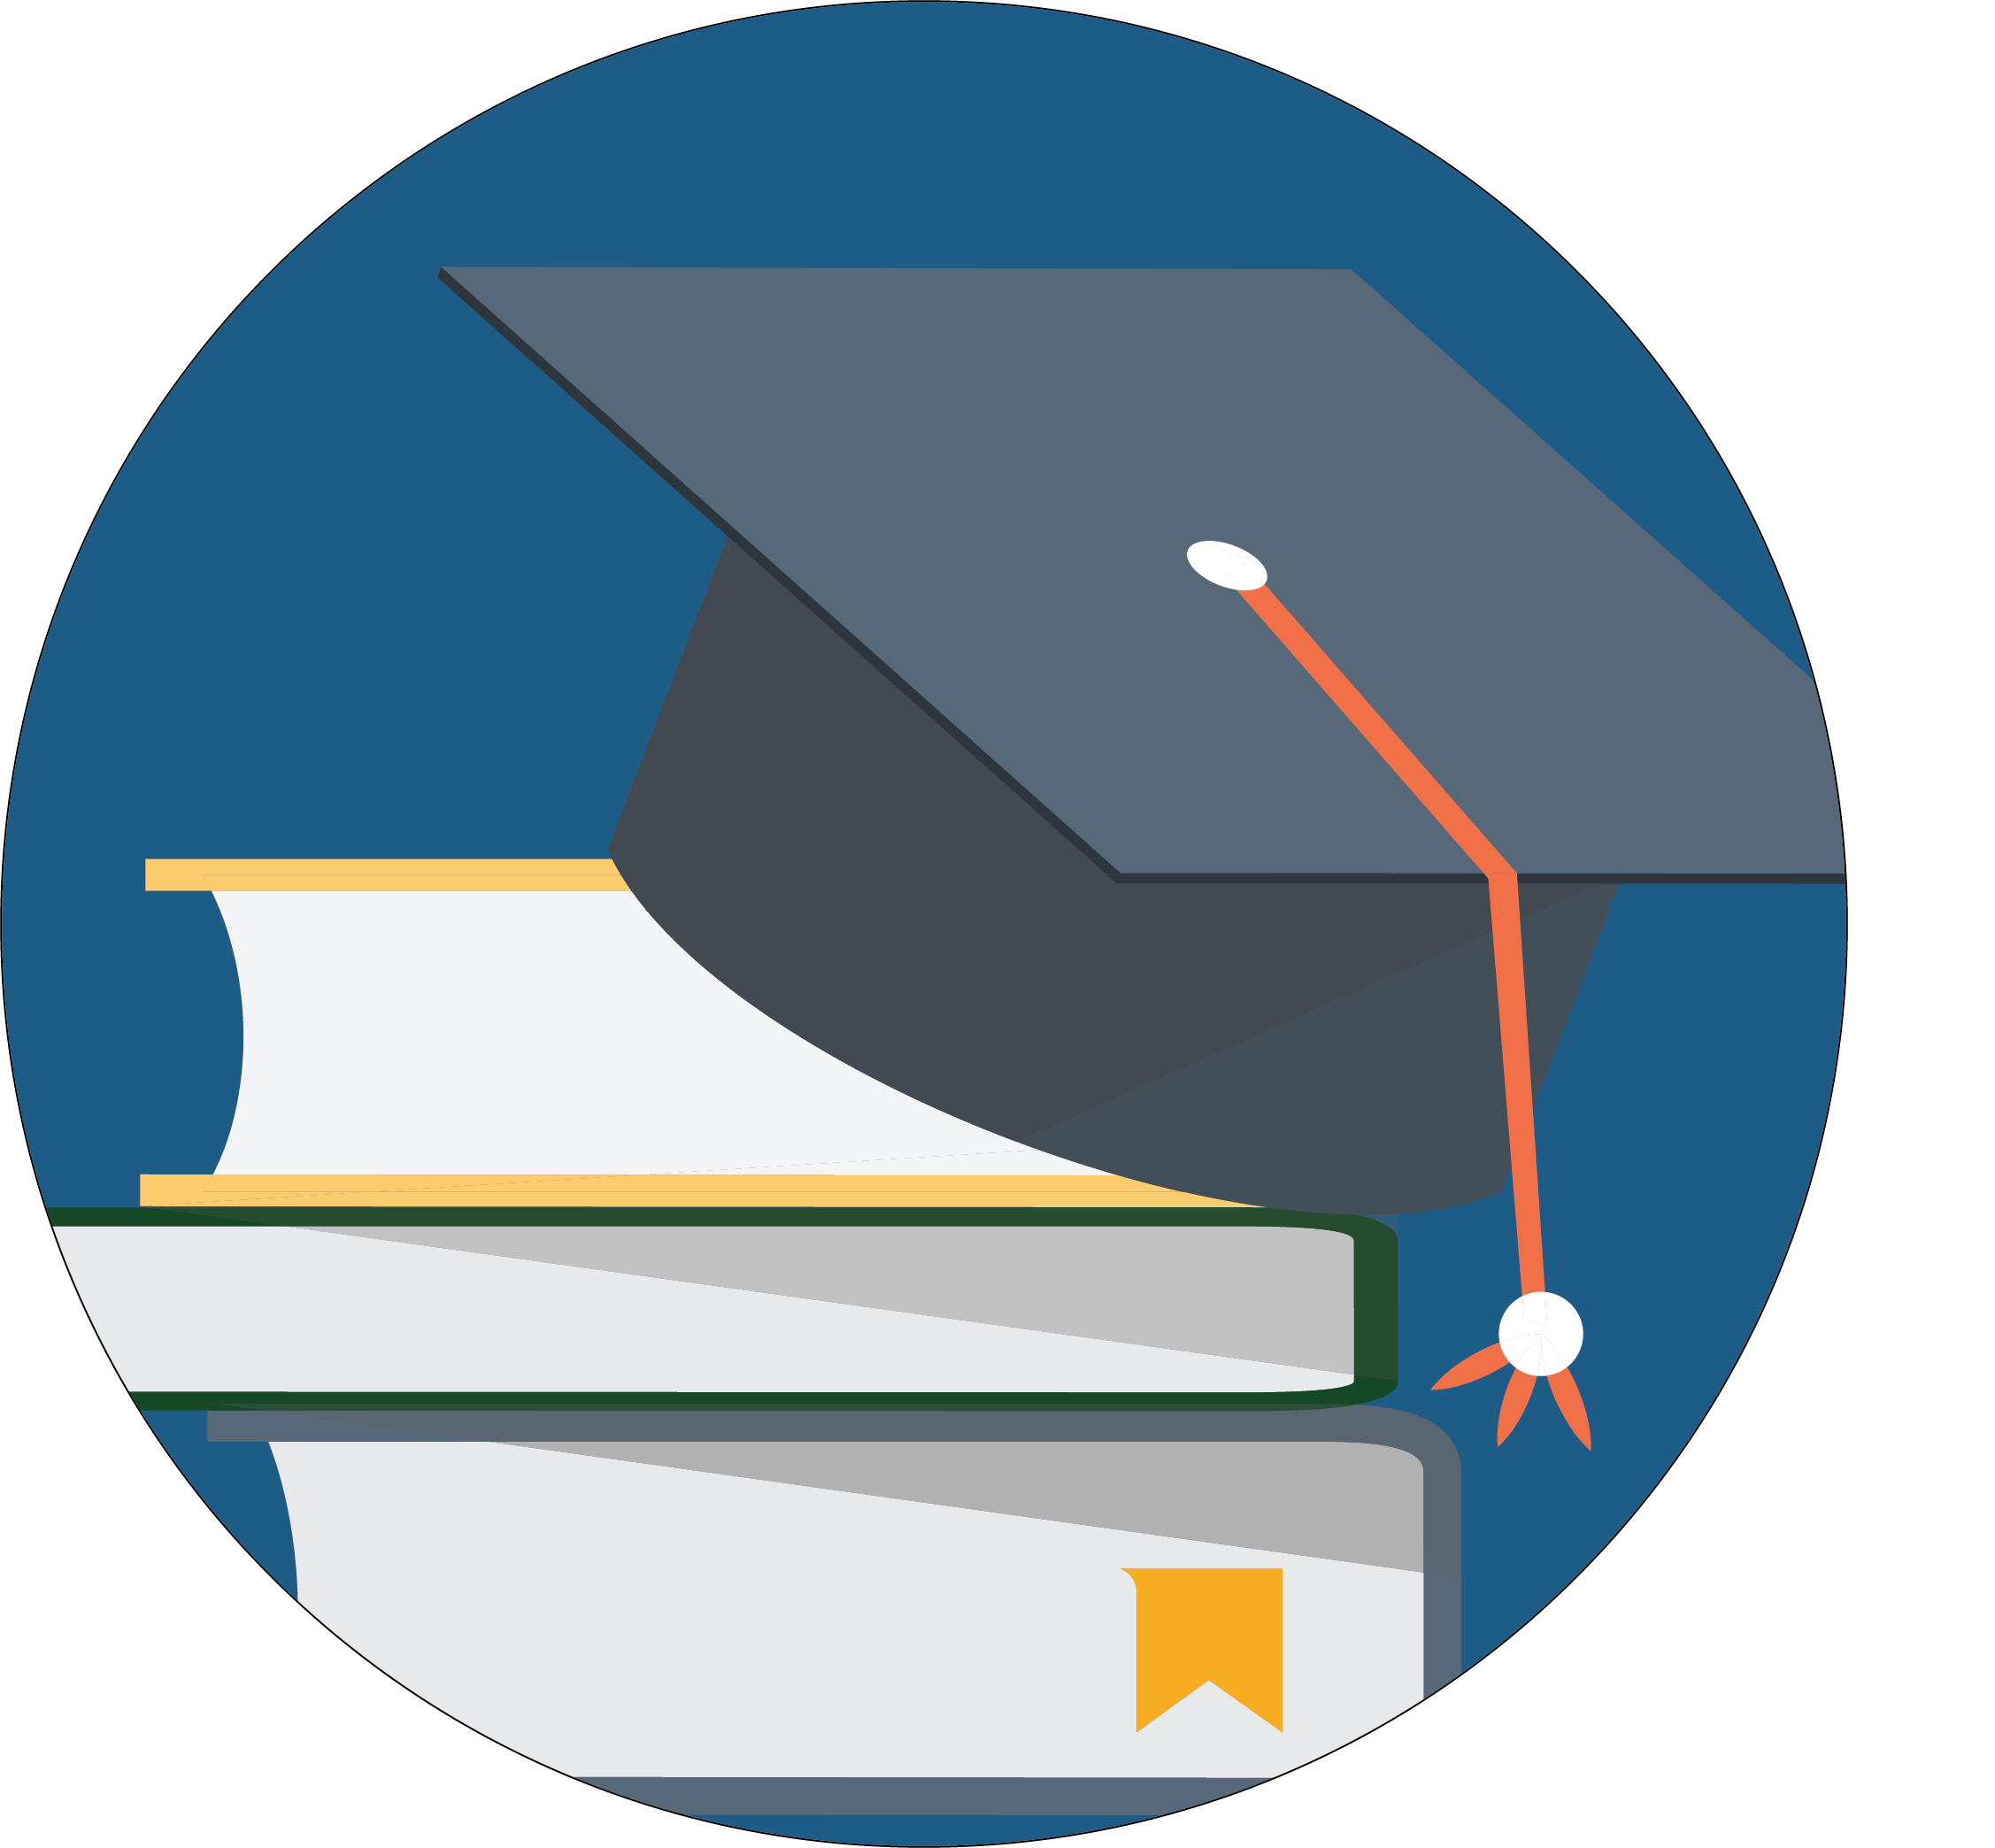 College icon showing three stacked books with a graduation cap on top of the books